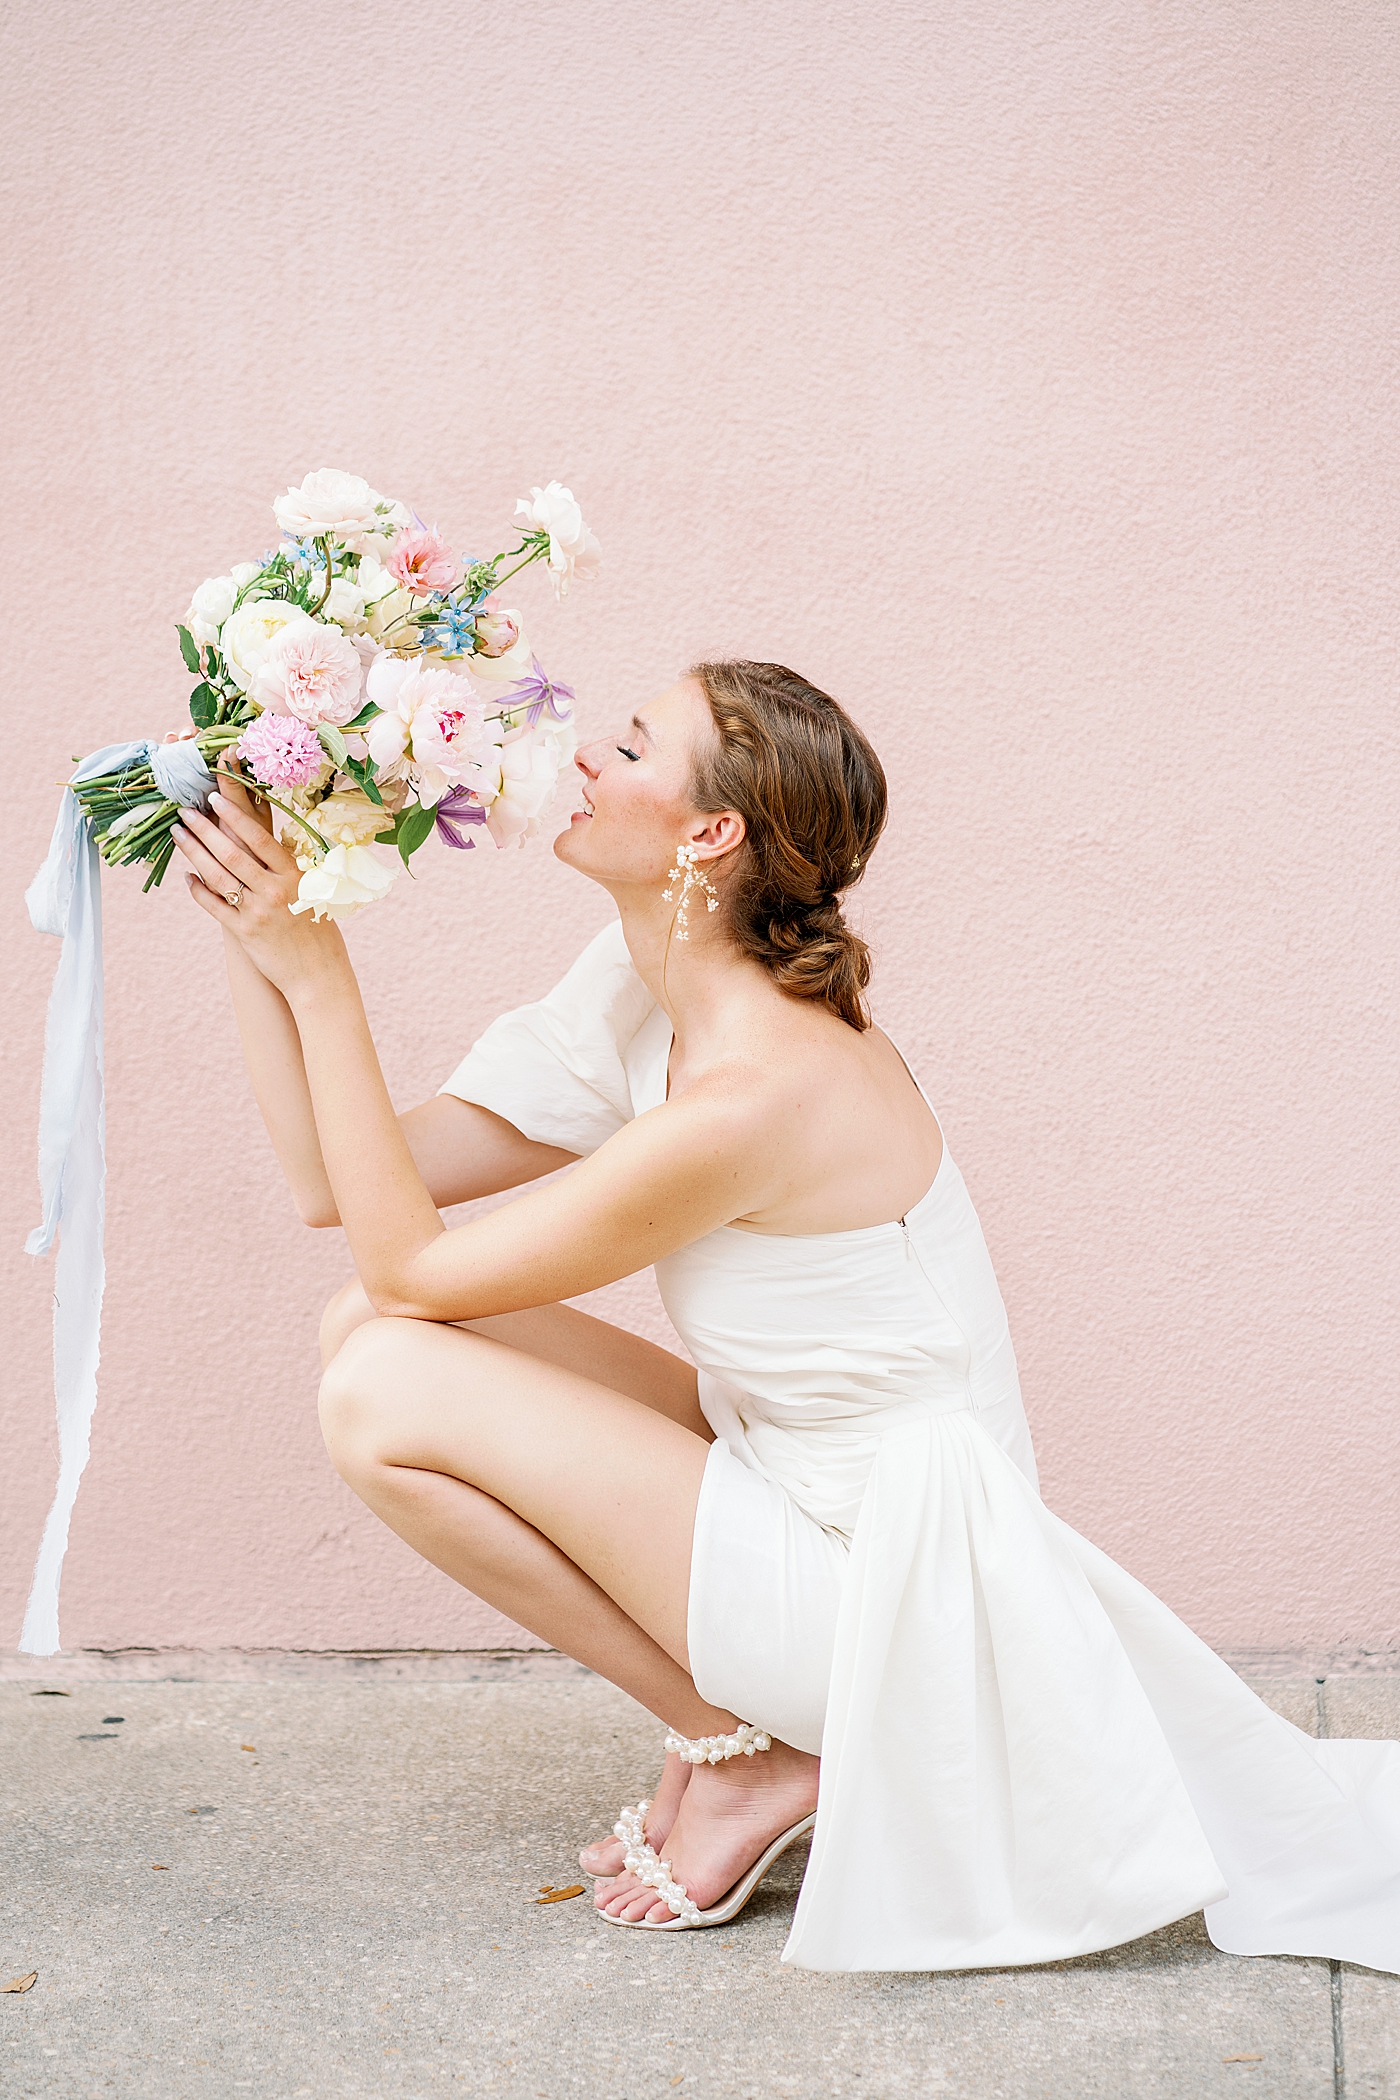 Bride in heels holding a bouquet of flowers| Images by Annie Laura Photo